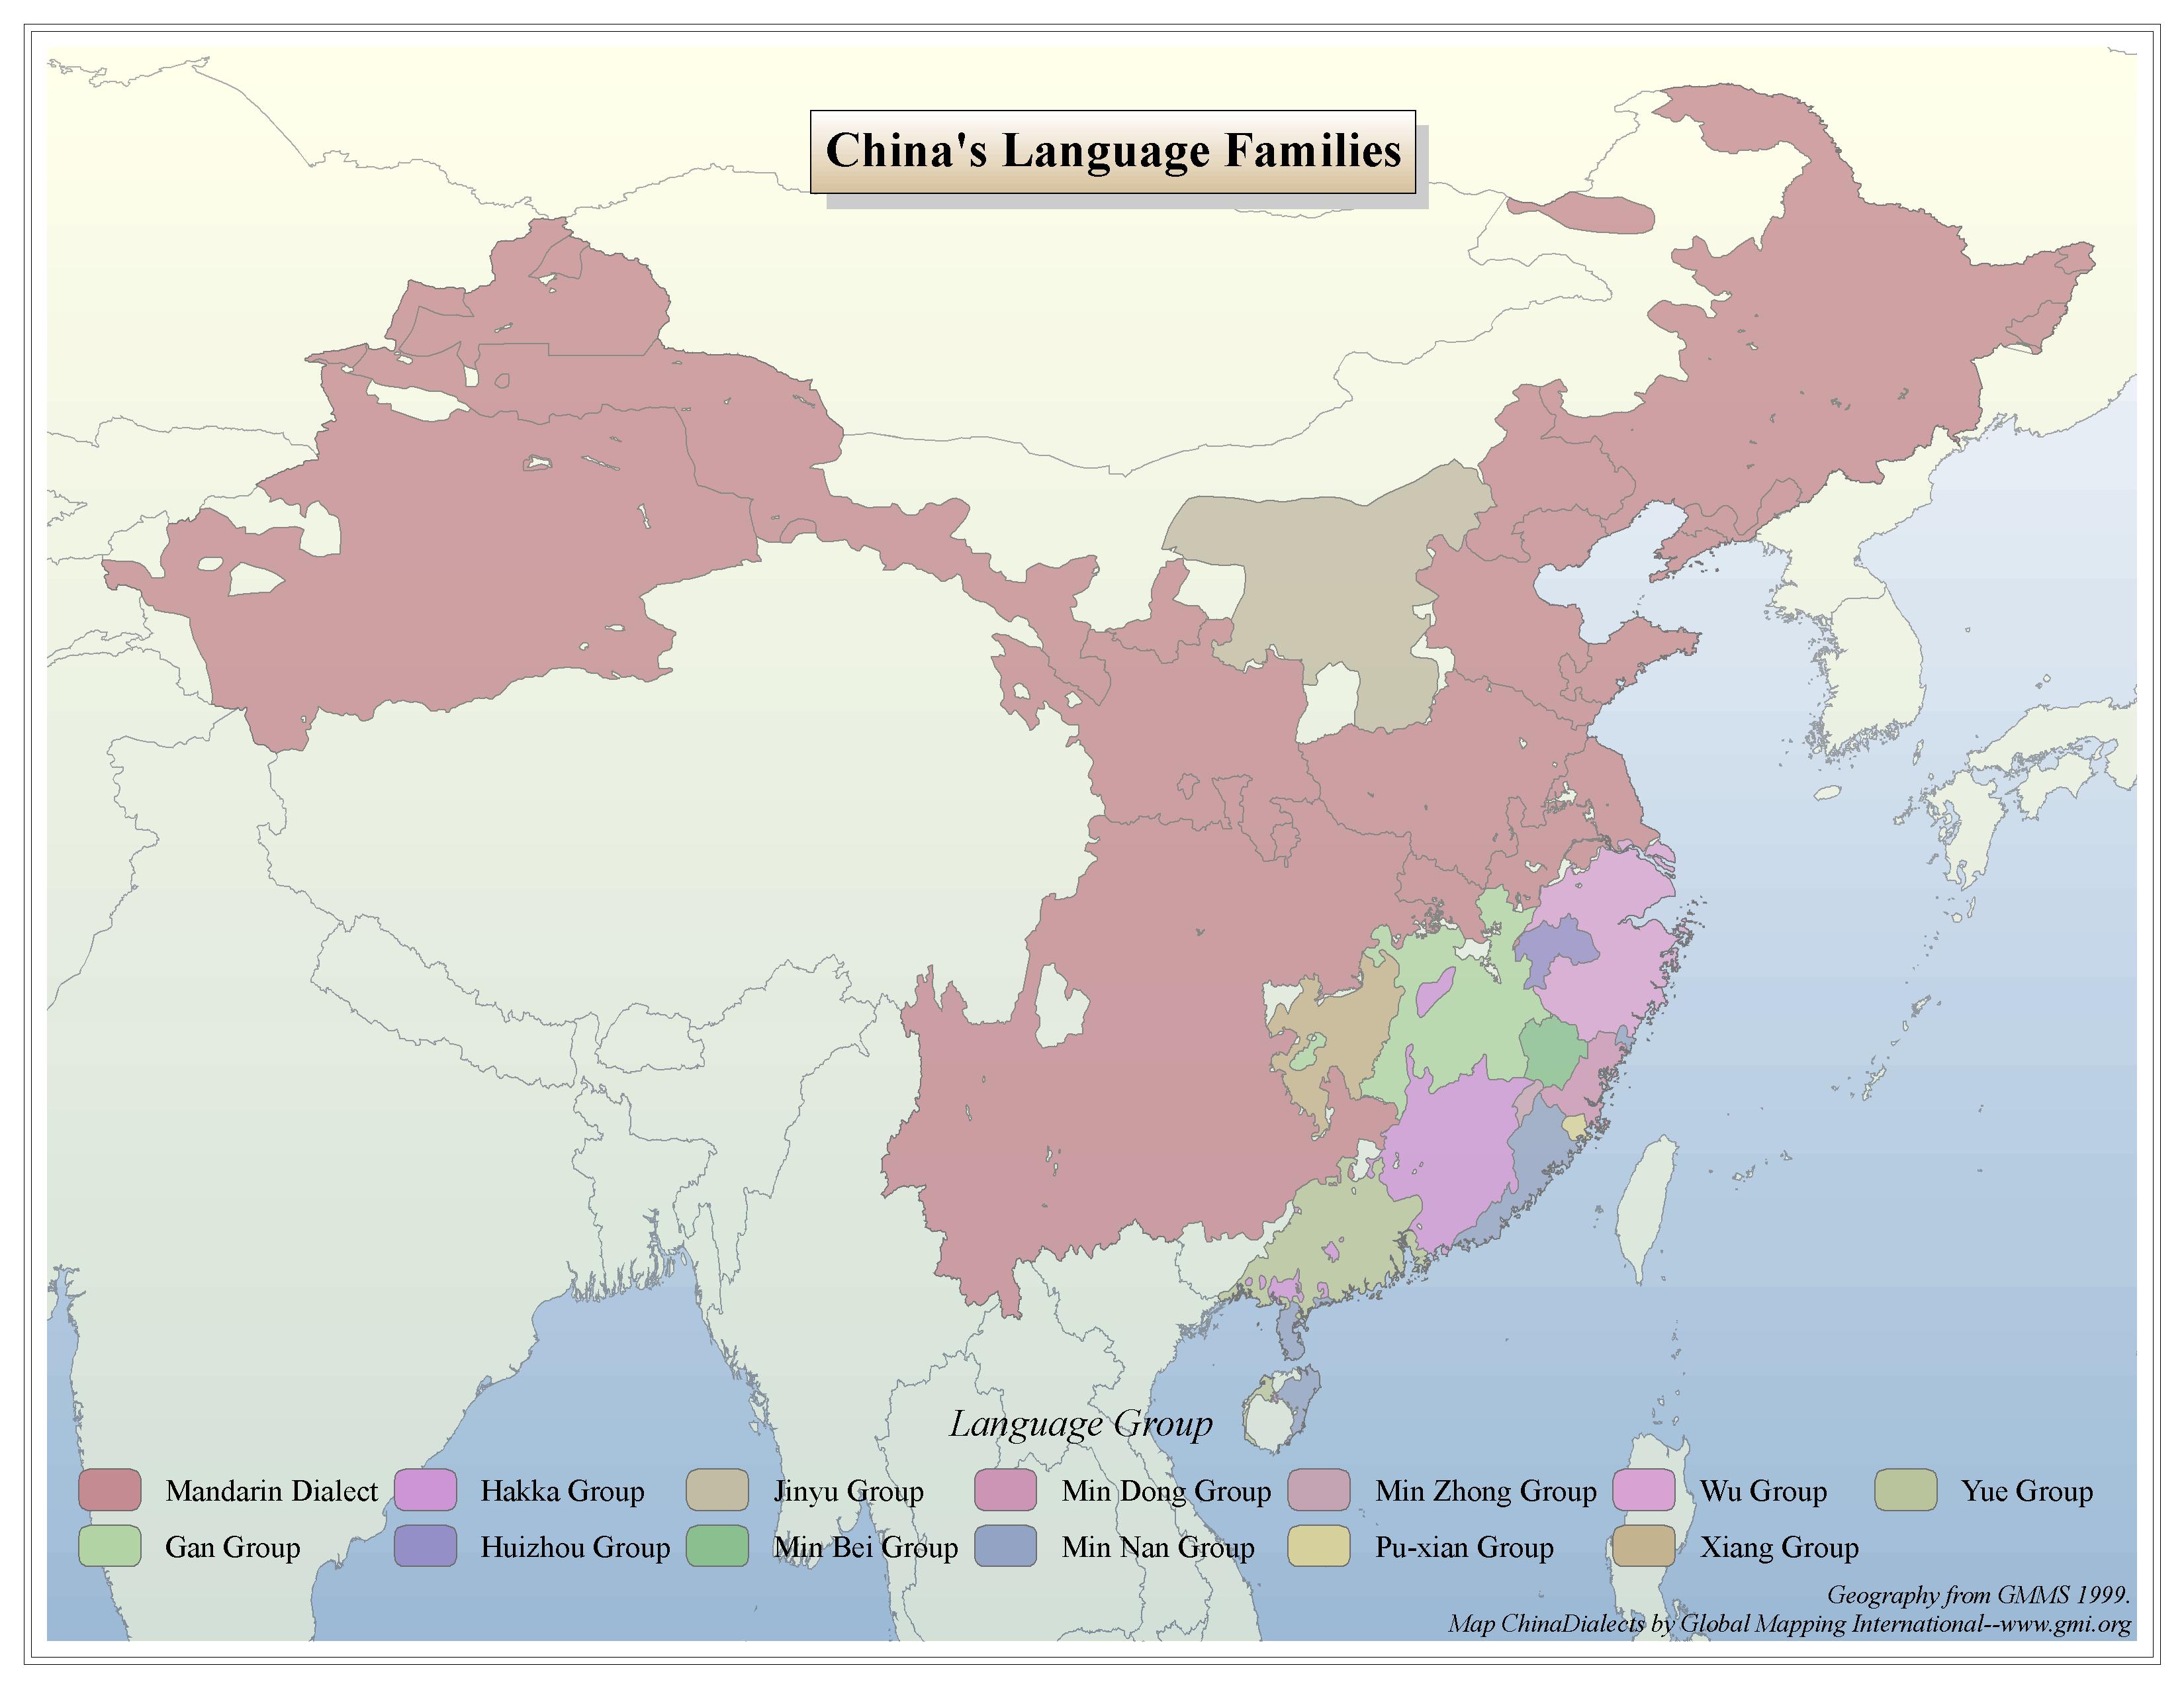 China - Distribution of Chinese Dialects